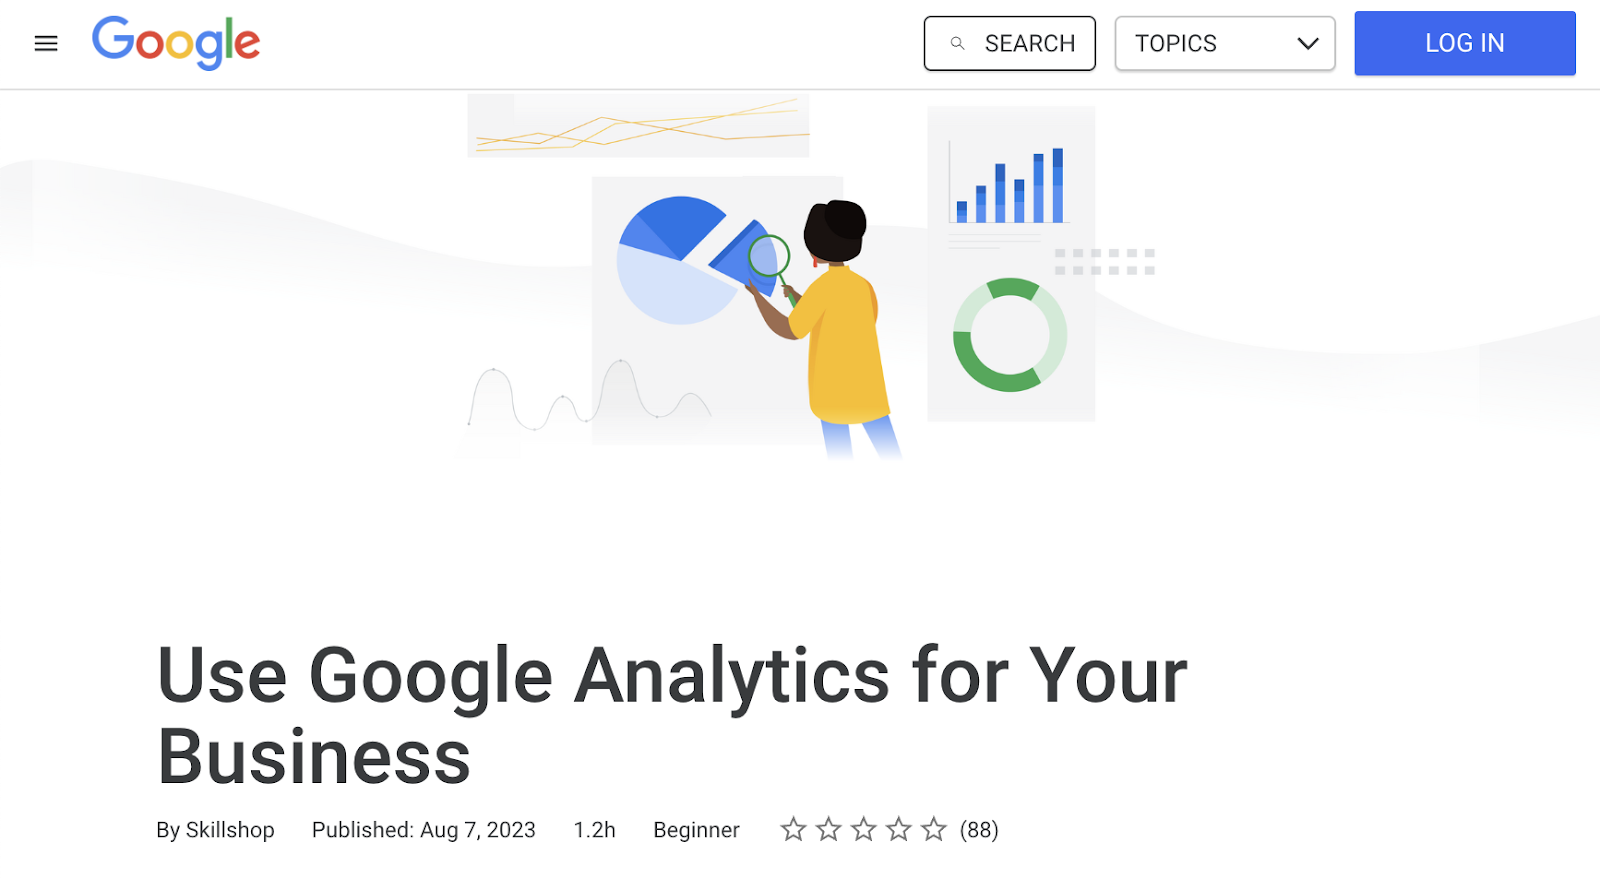 Use Google Analytics for Your Business course